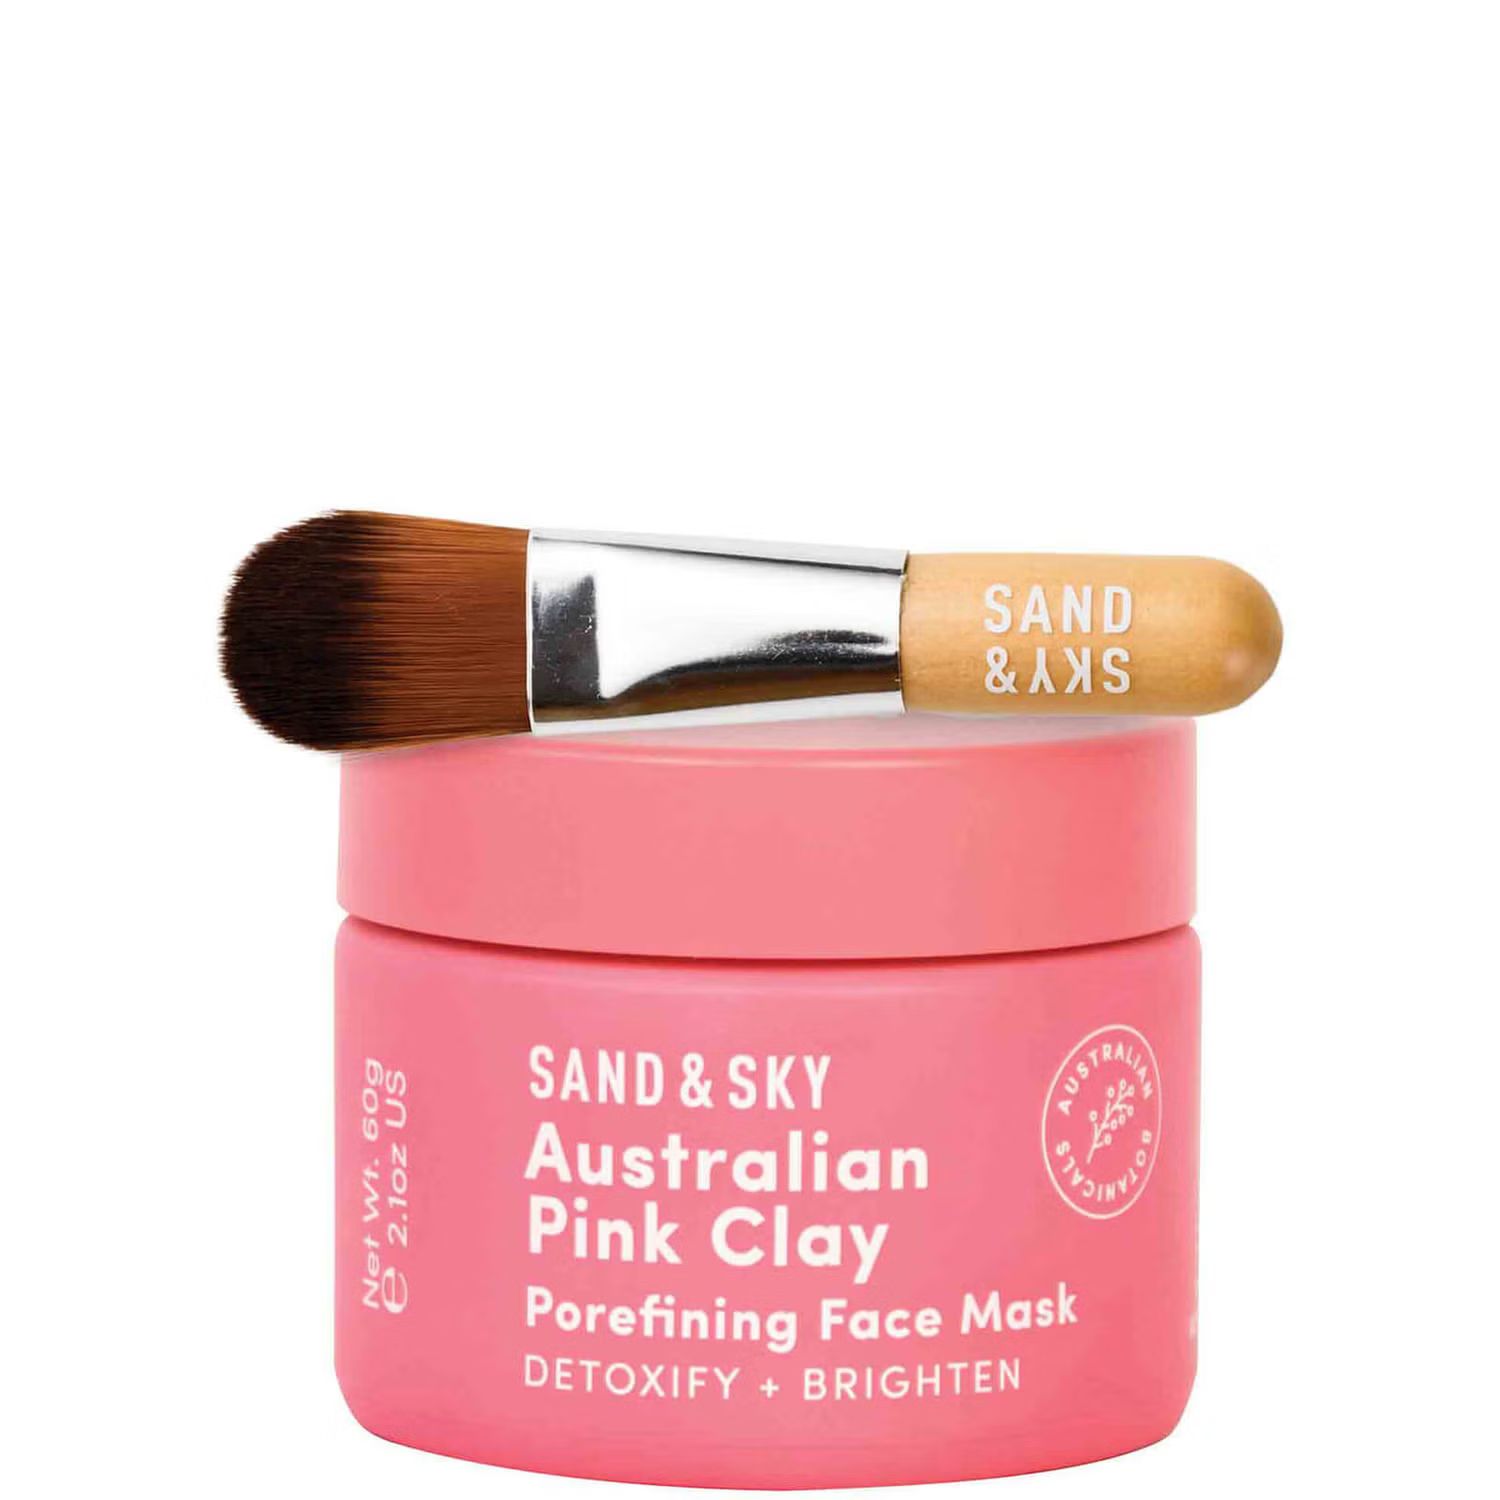 Sand&Sky Brilliant Skin Purifying Pink Clay Mask | Cult Beauty (Global)